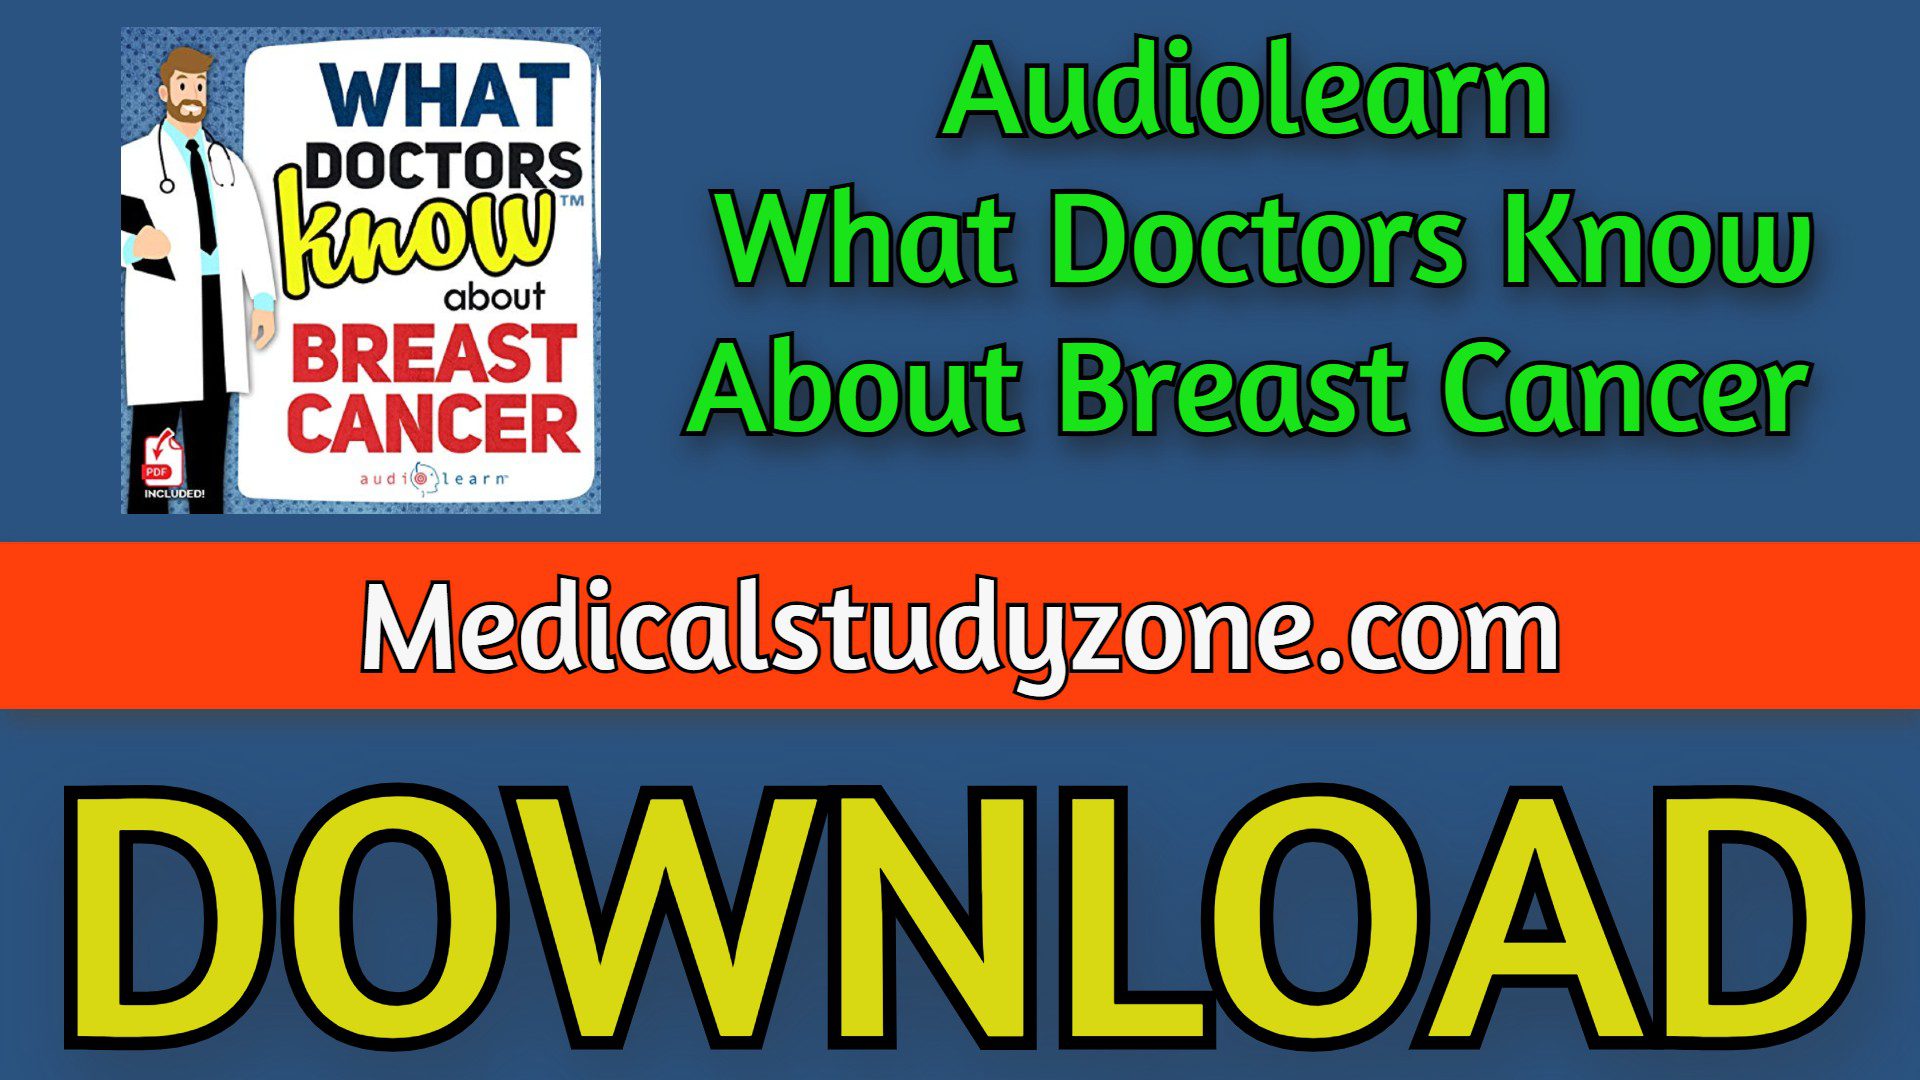 Audiolearn What Doctors Know About Breast Cancer 2021 Free Download